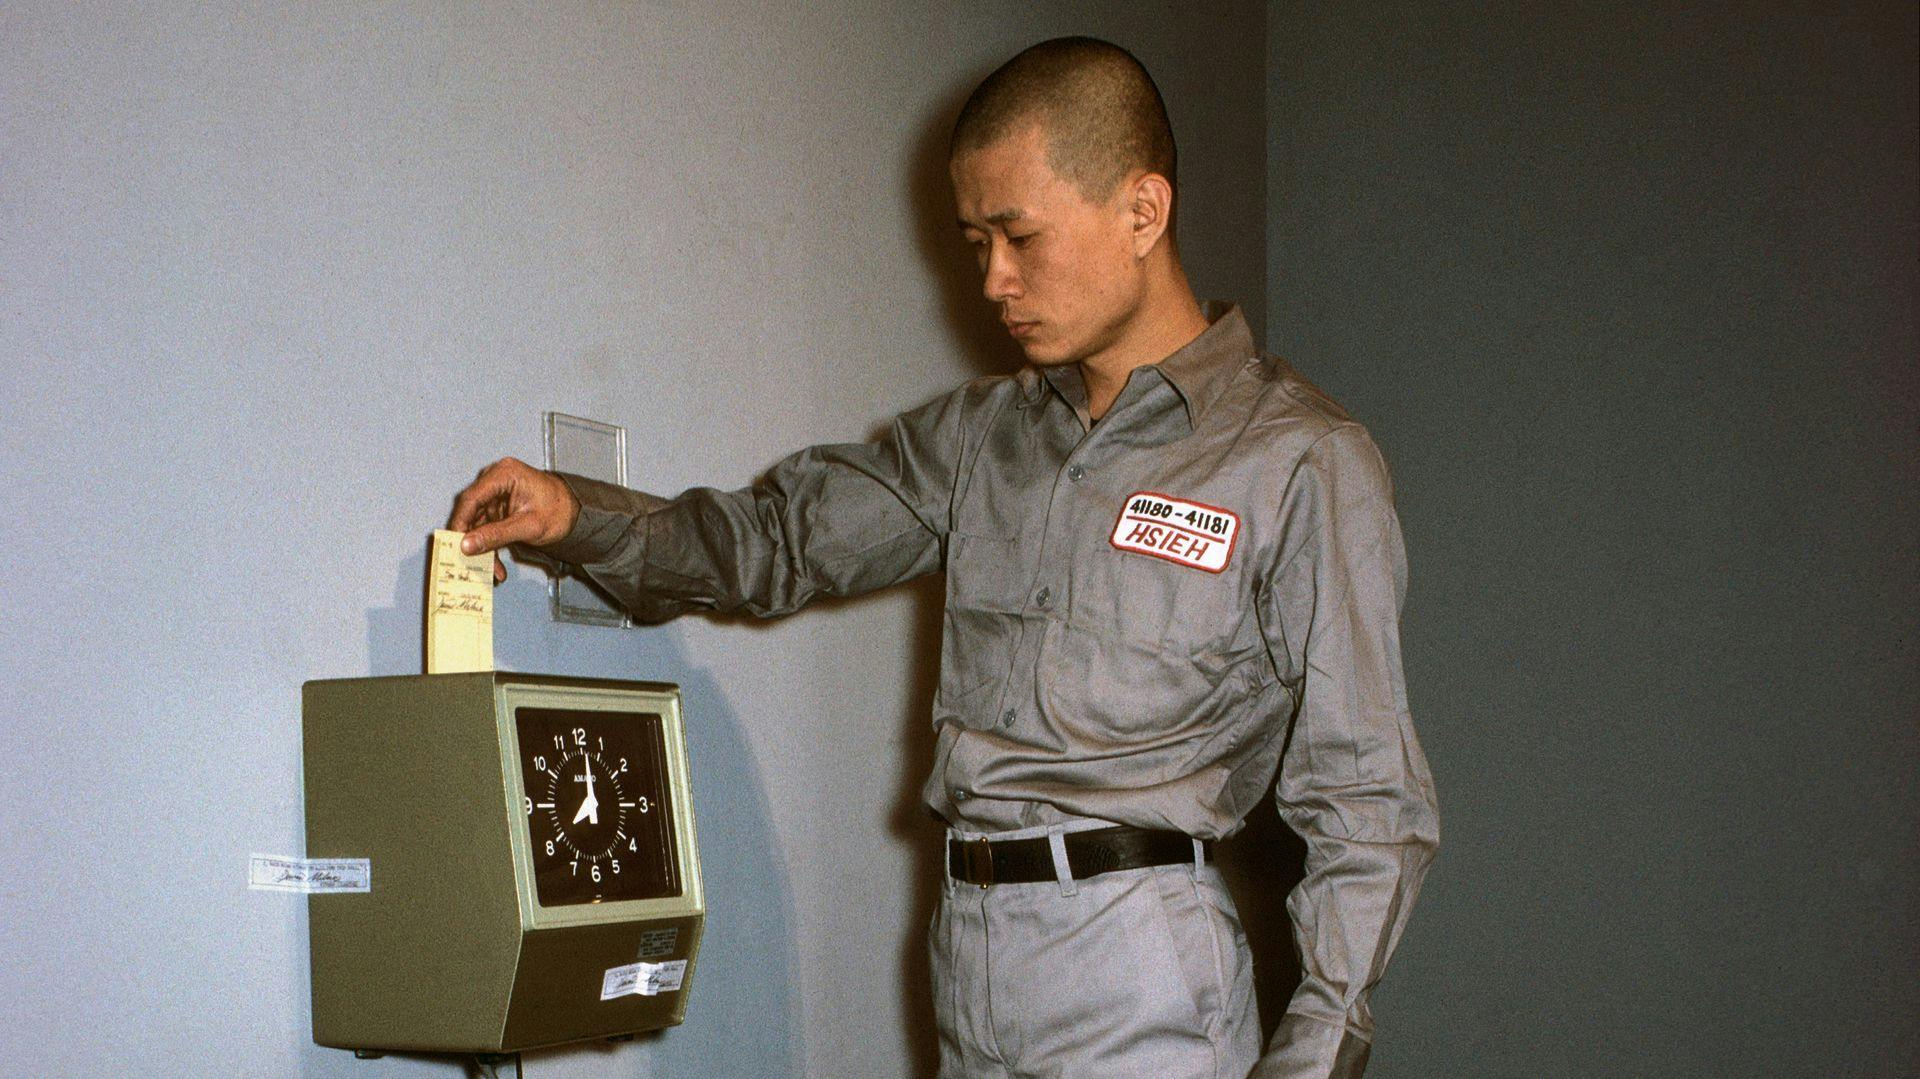 One Year Performance 1980-1981 - Tehching Hsieh